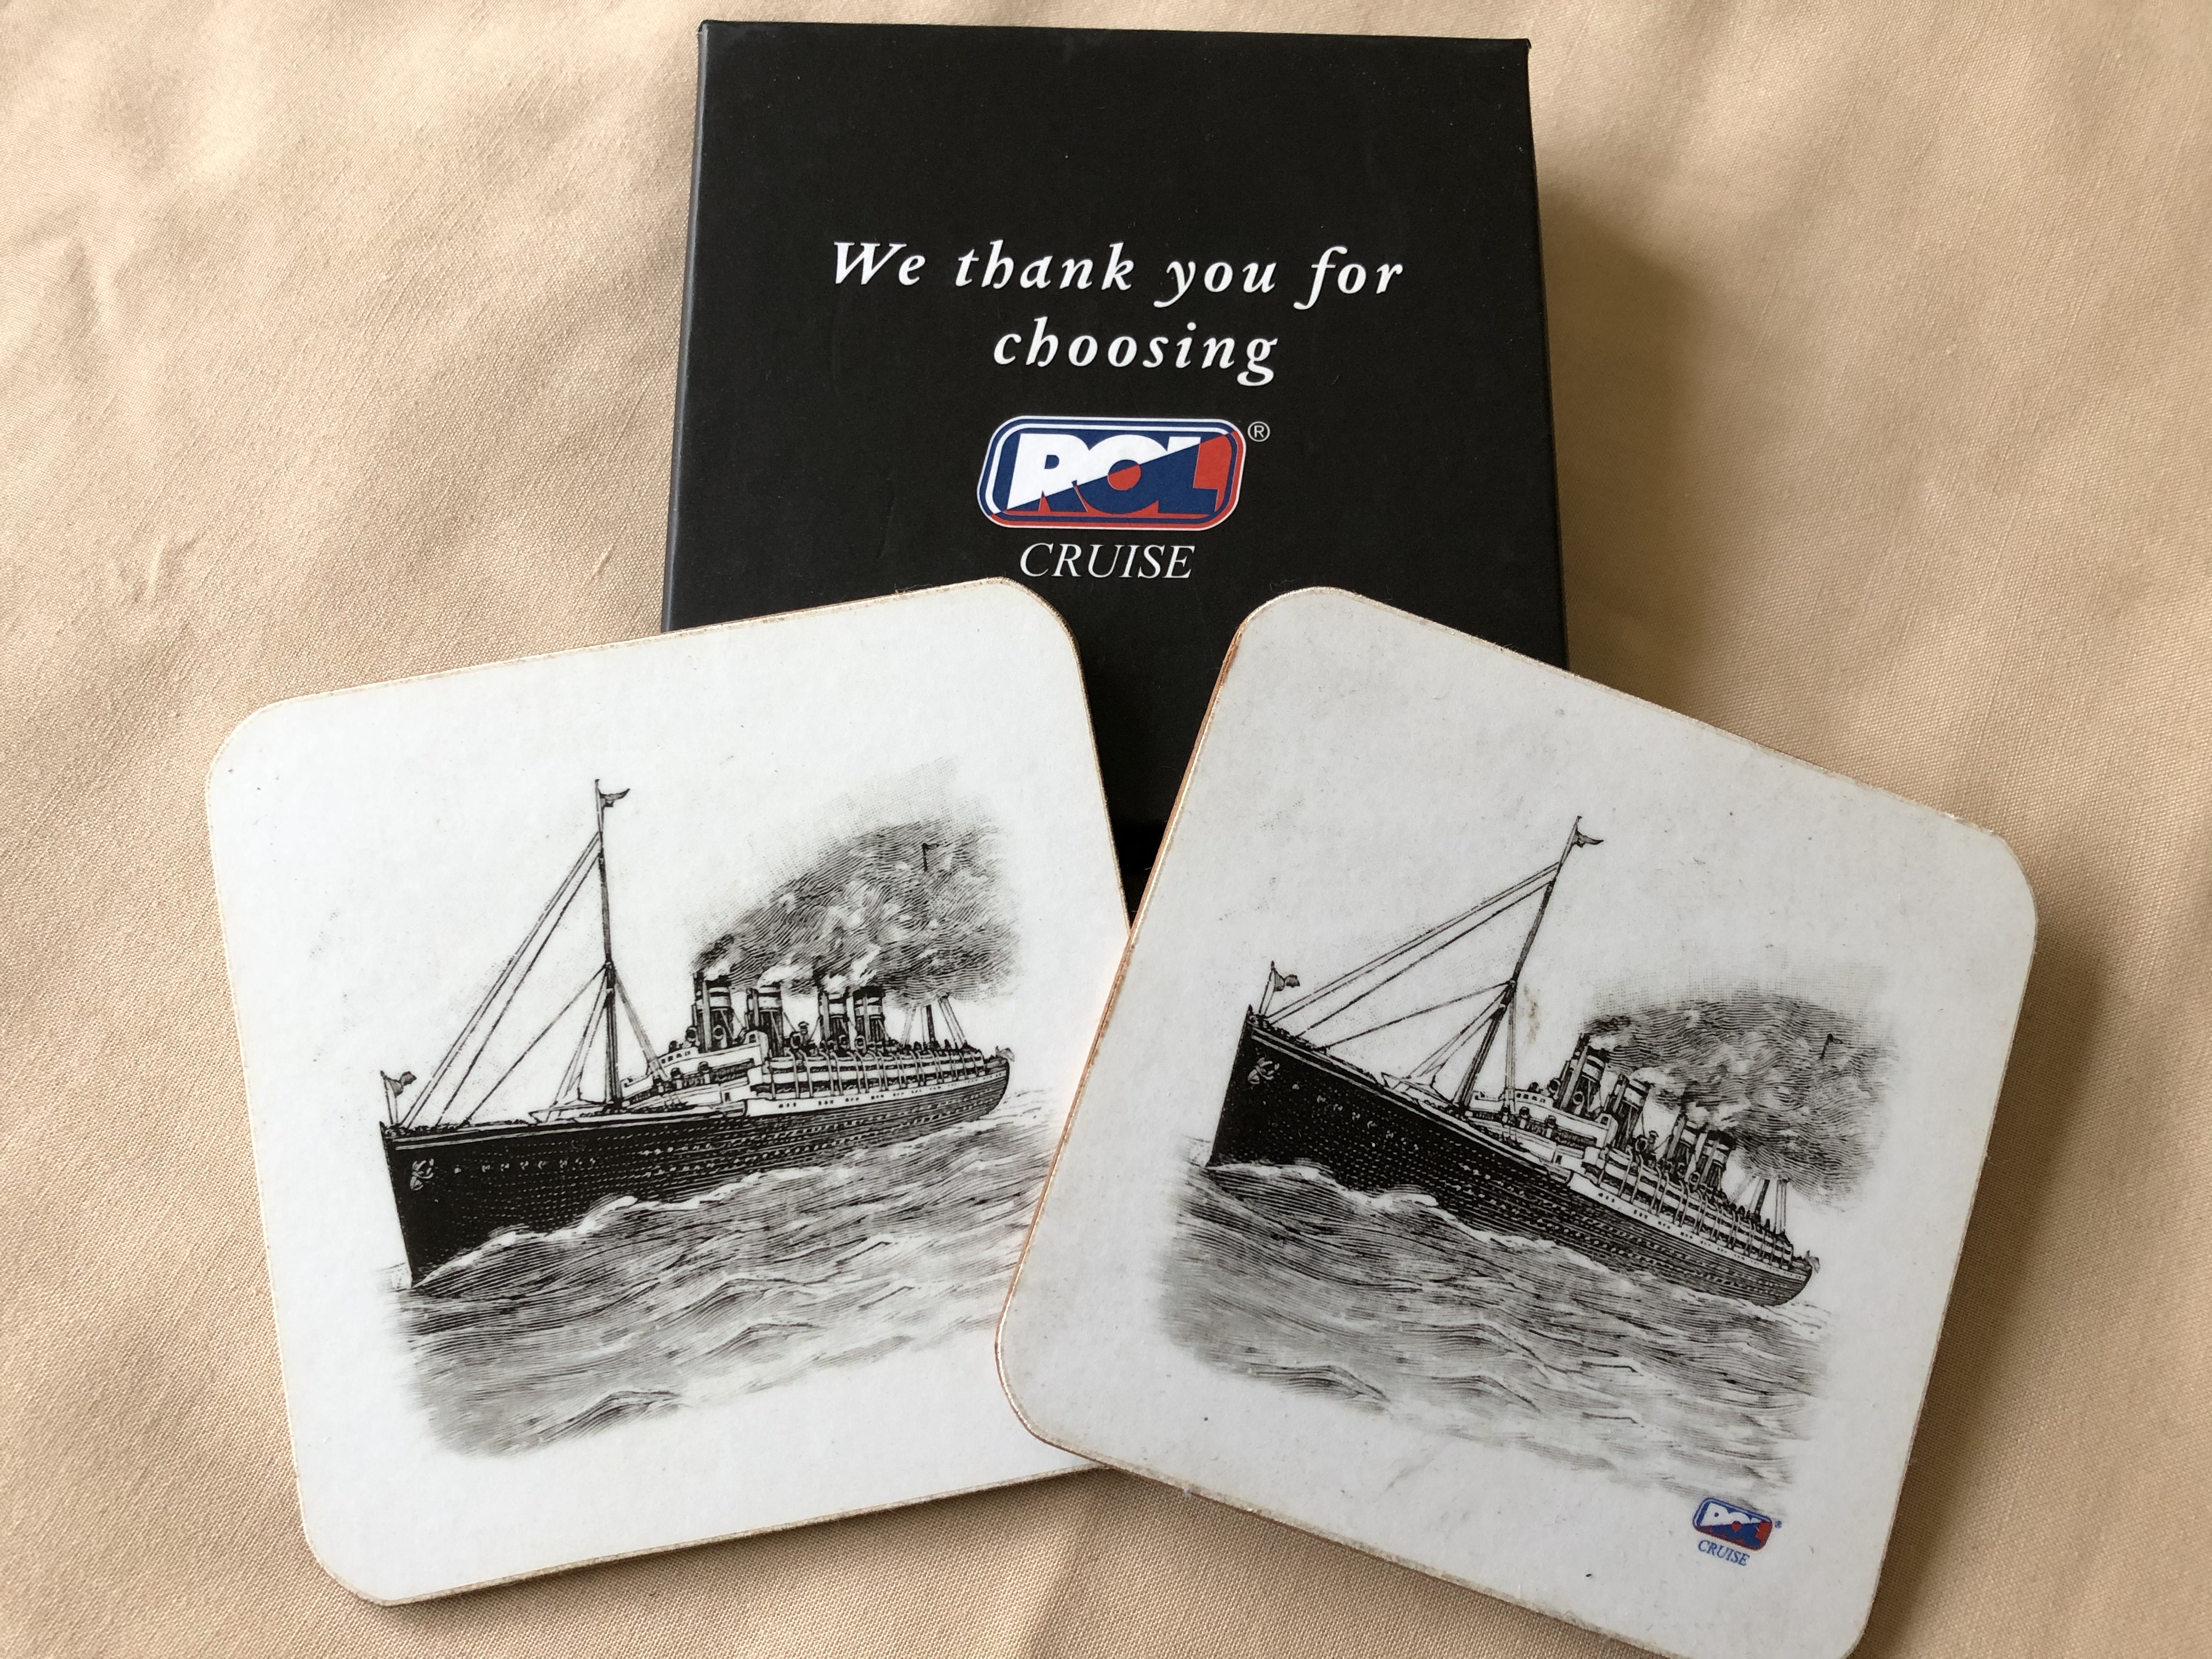 PAIR OF SOUVENIR MATS FROM THE ROL CRUISE BOOKING COMPANY